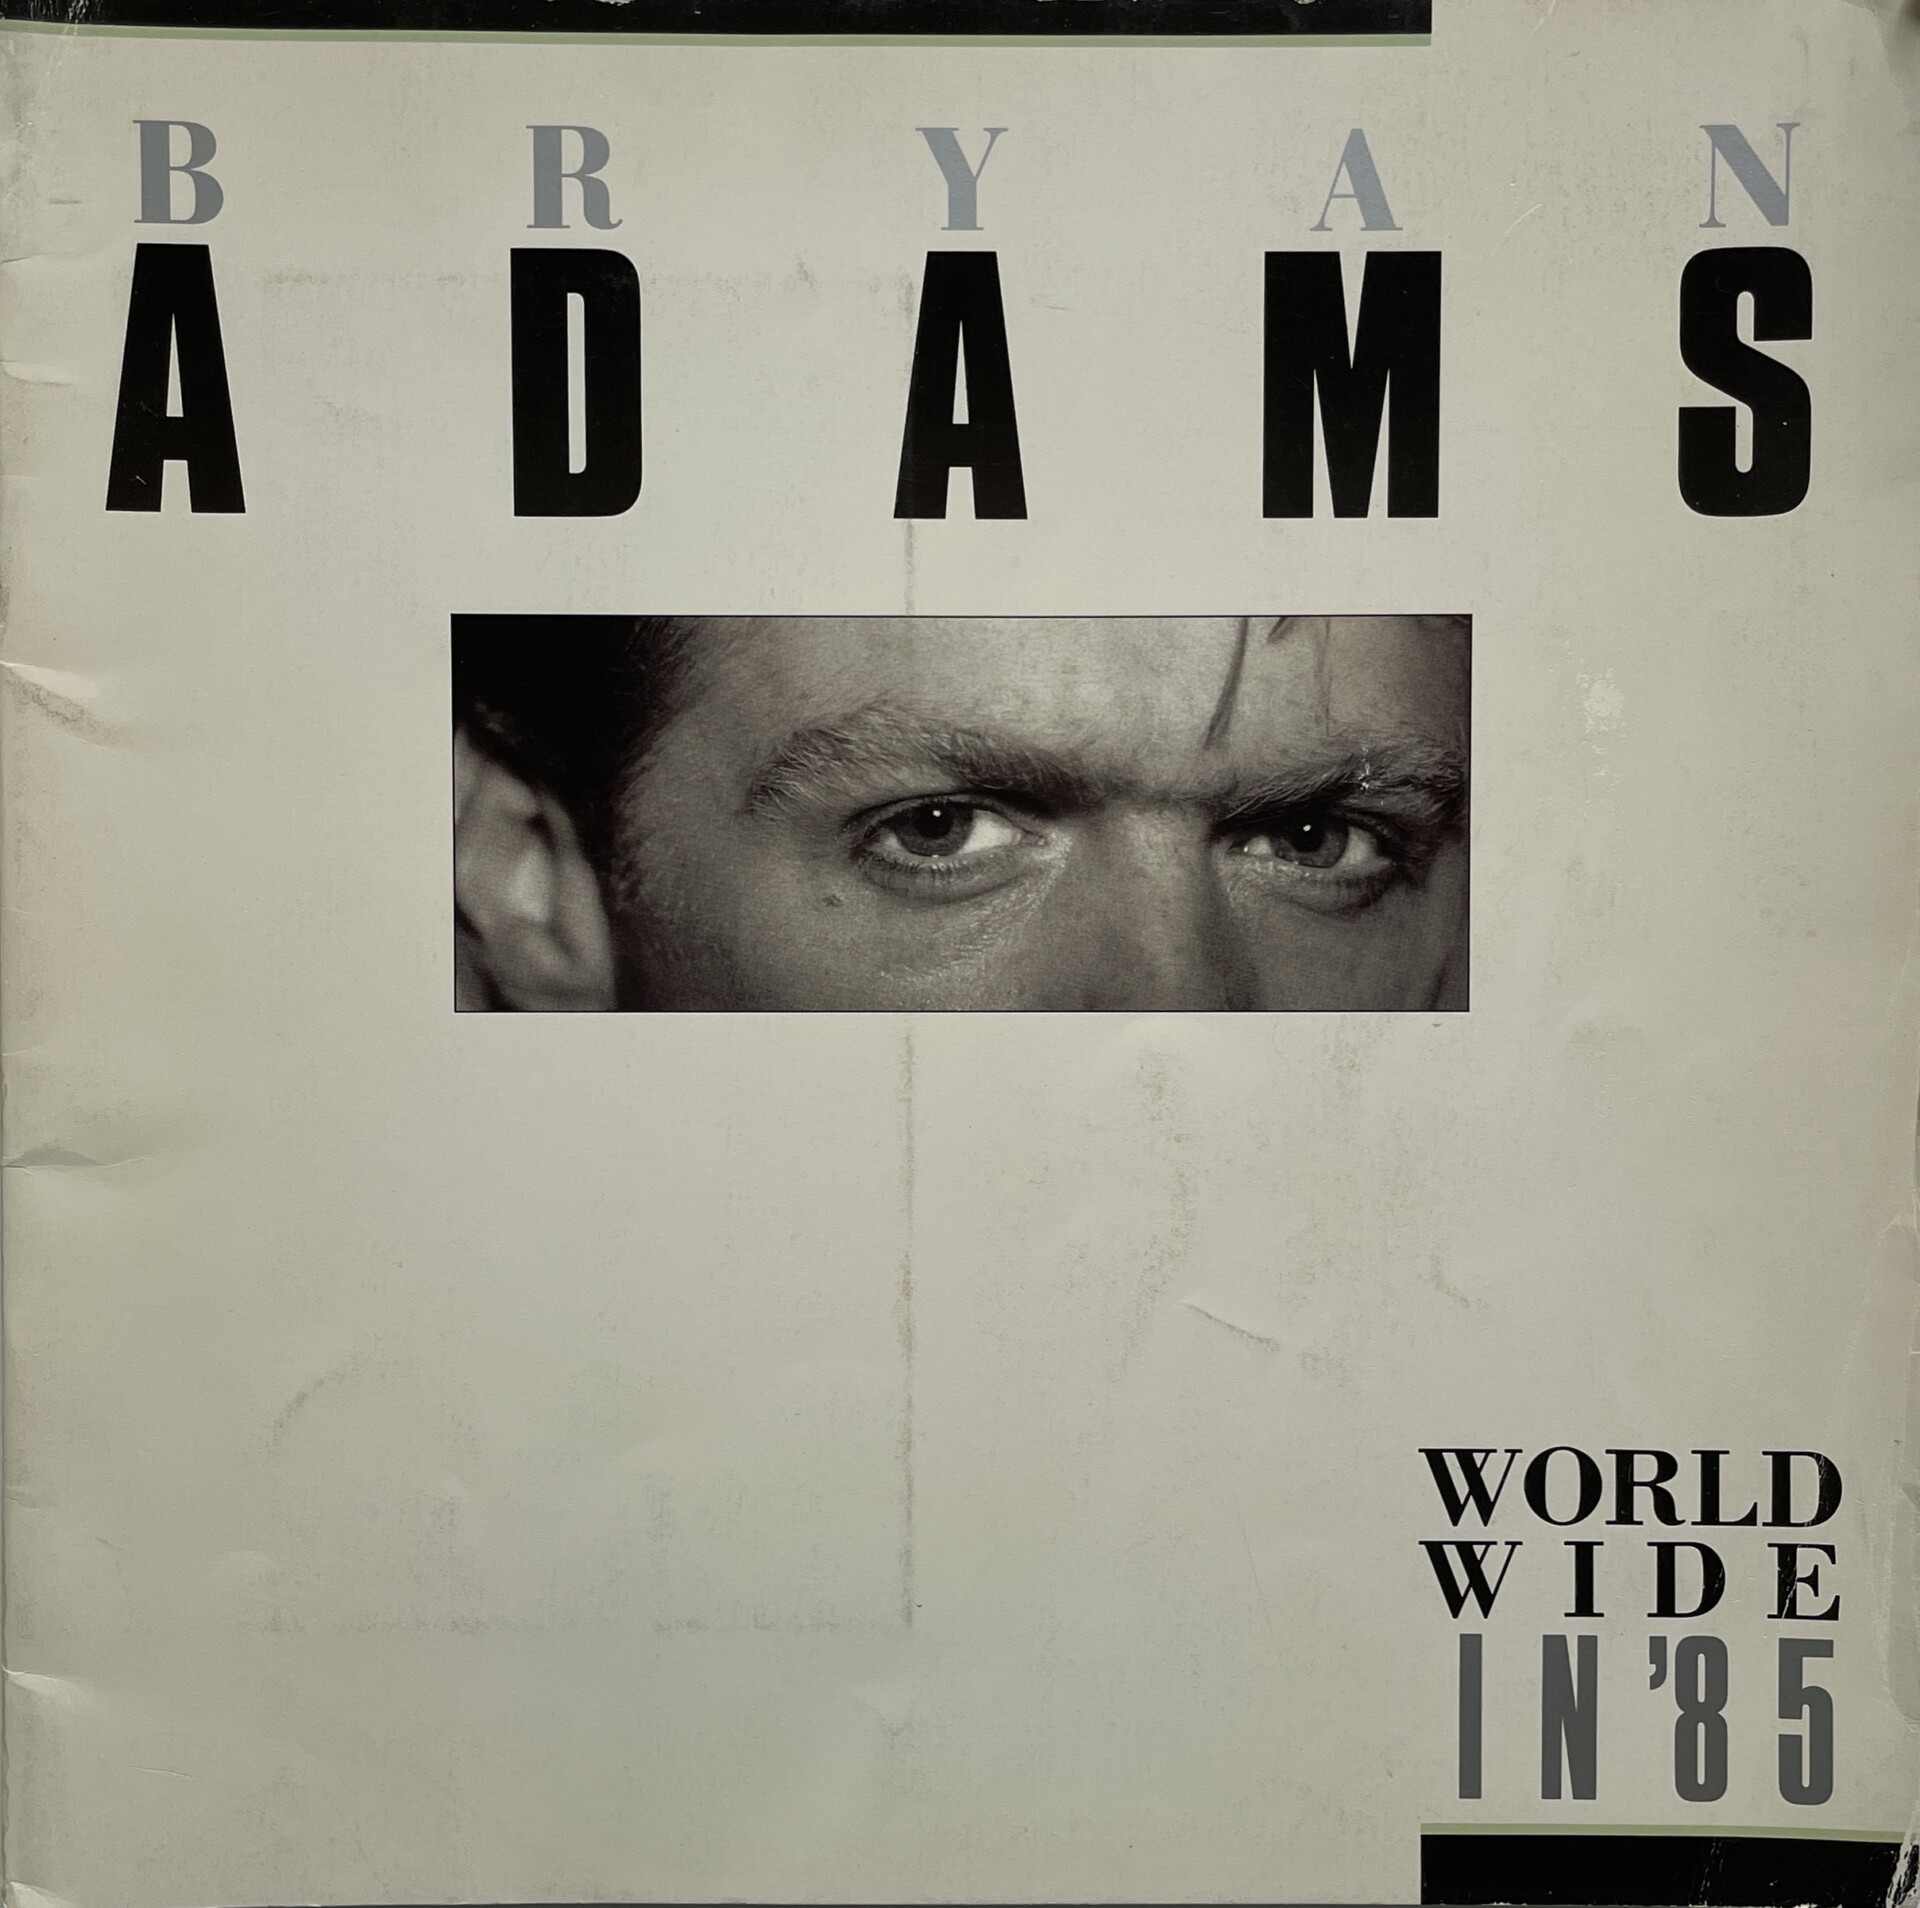 who did bryan adams tour with in 1985